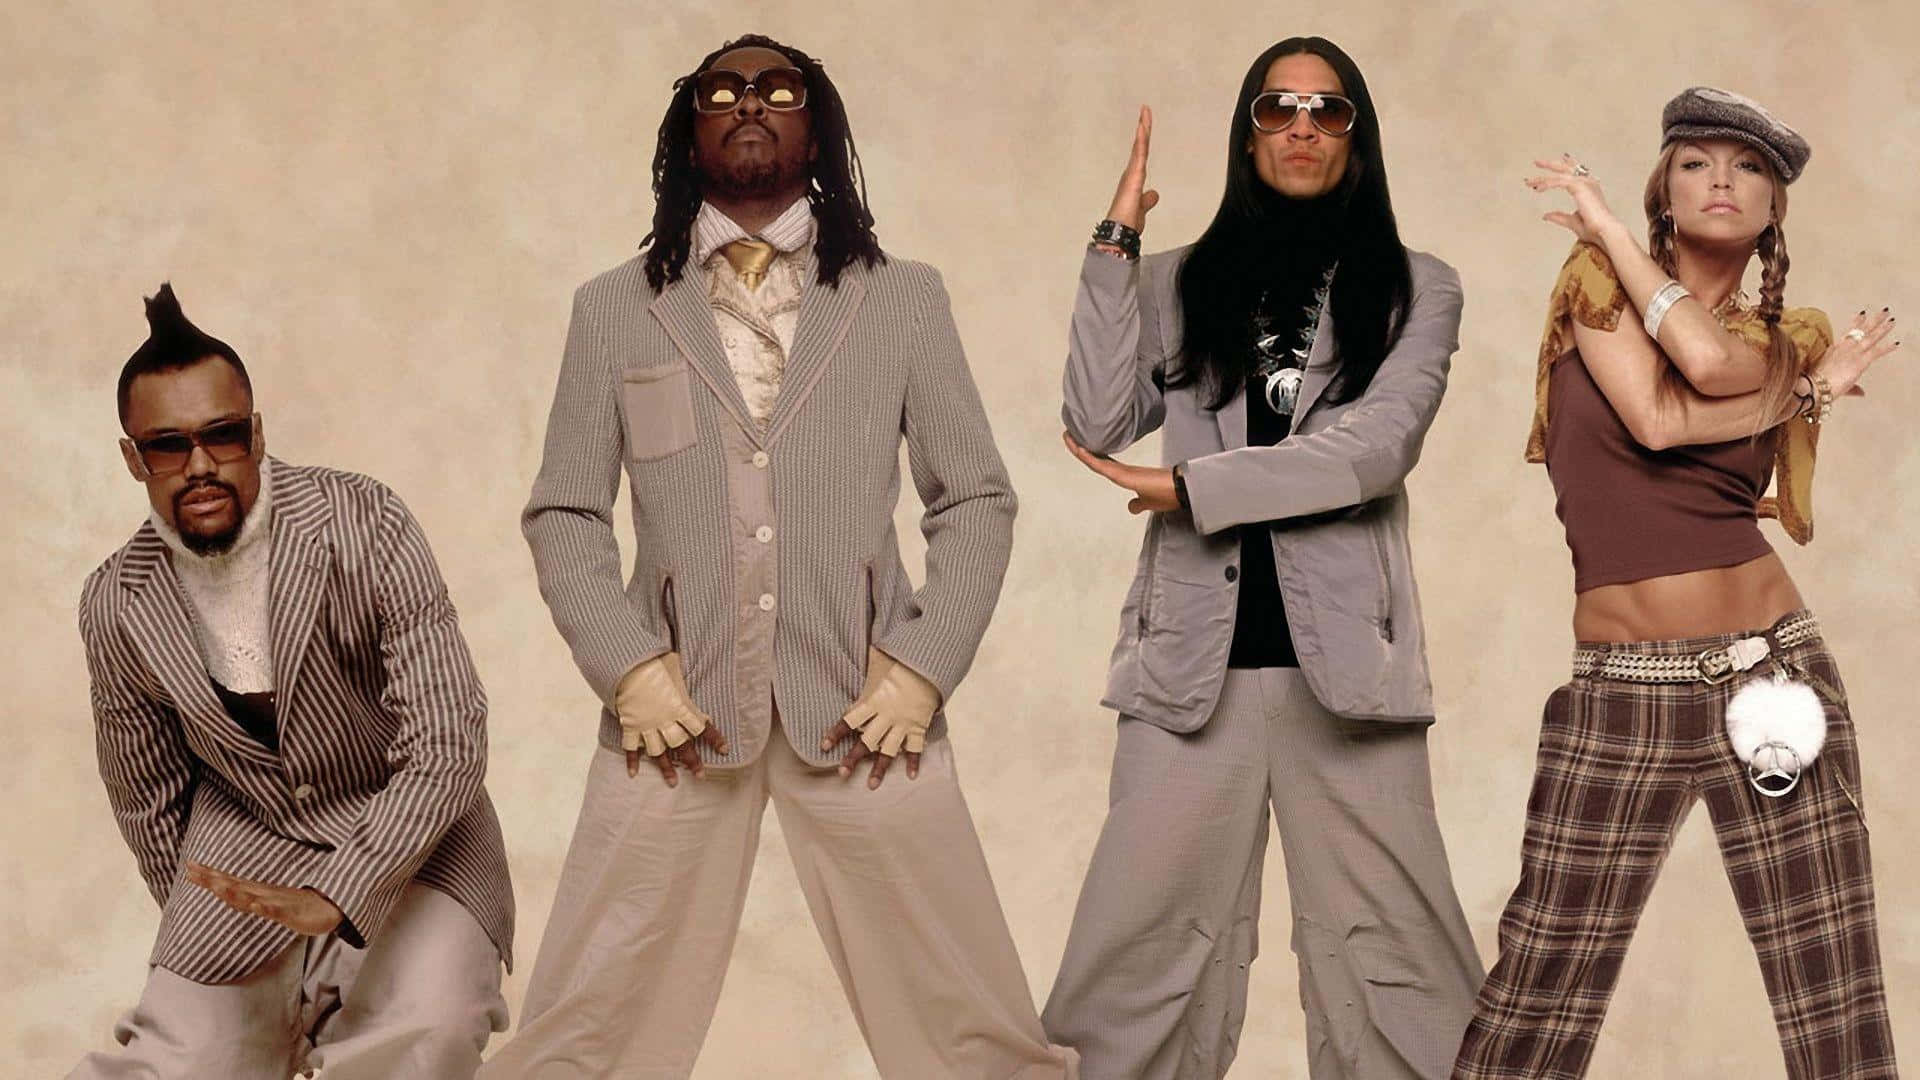 The Black Eyed Peas bring their musical energy to the stage Wallpaper